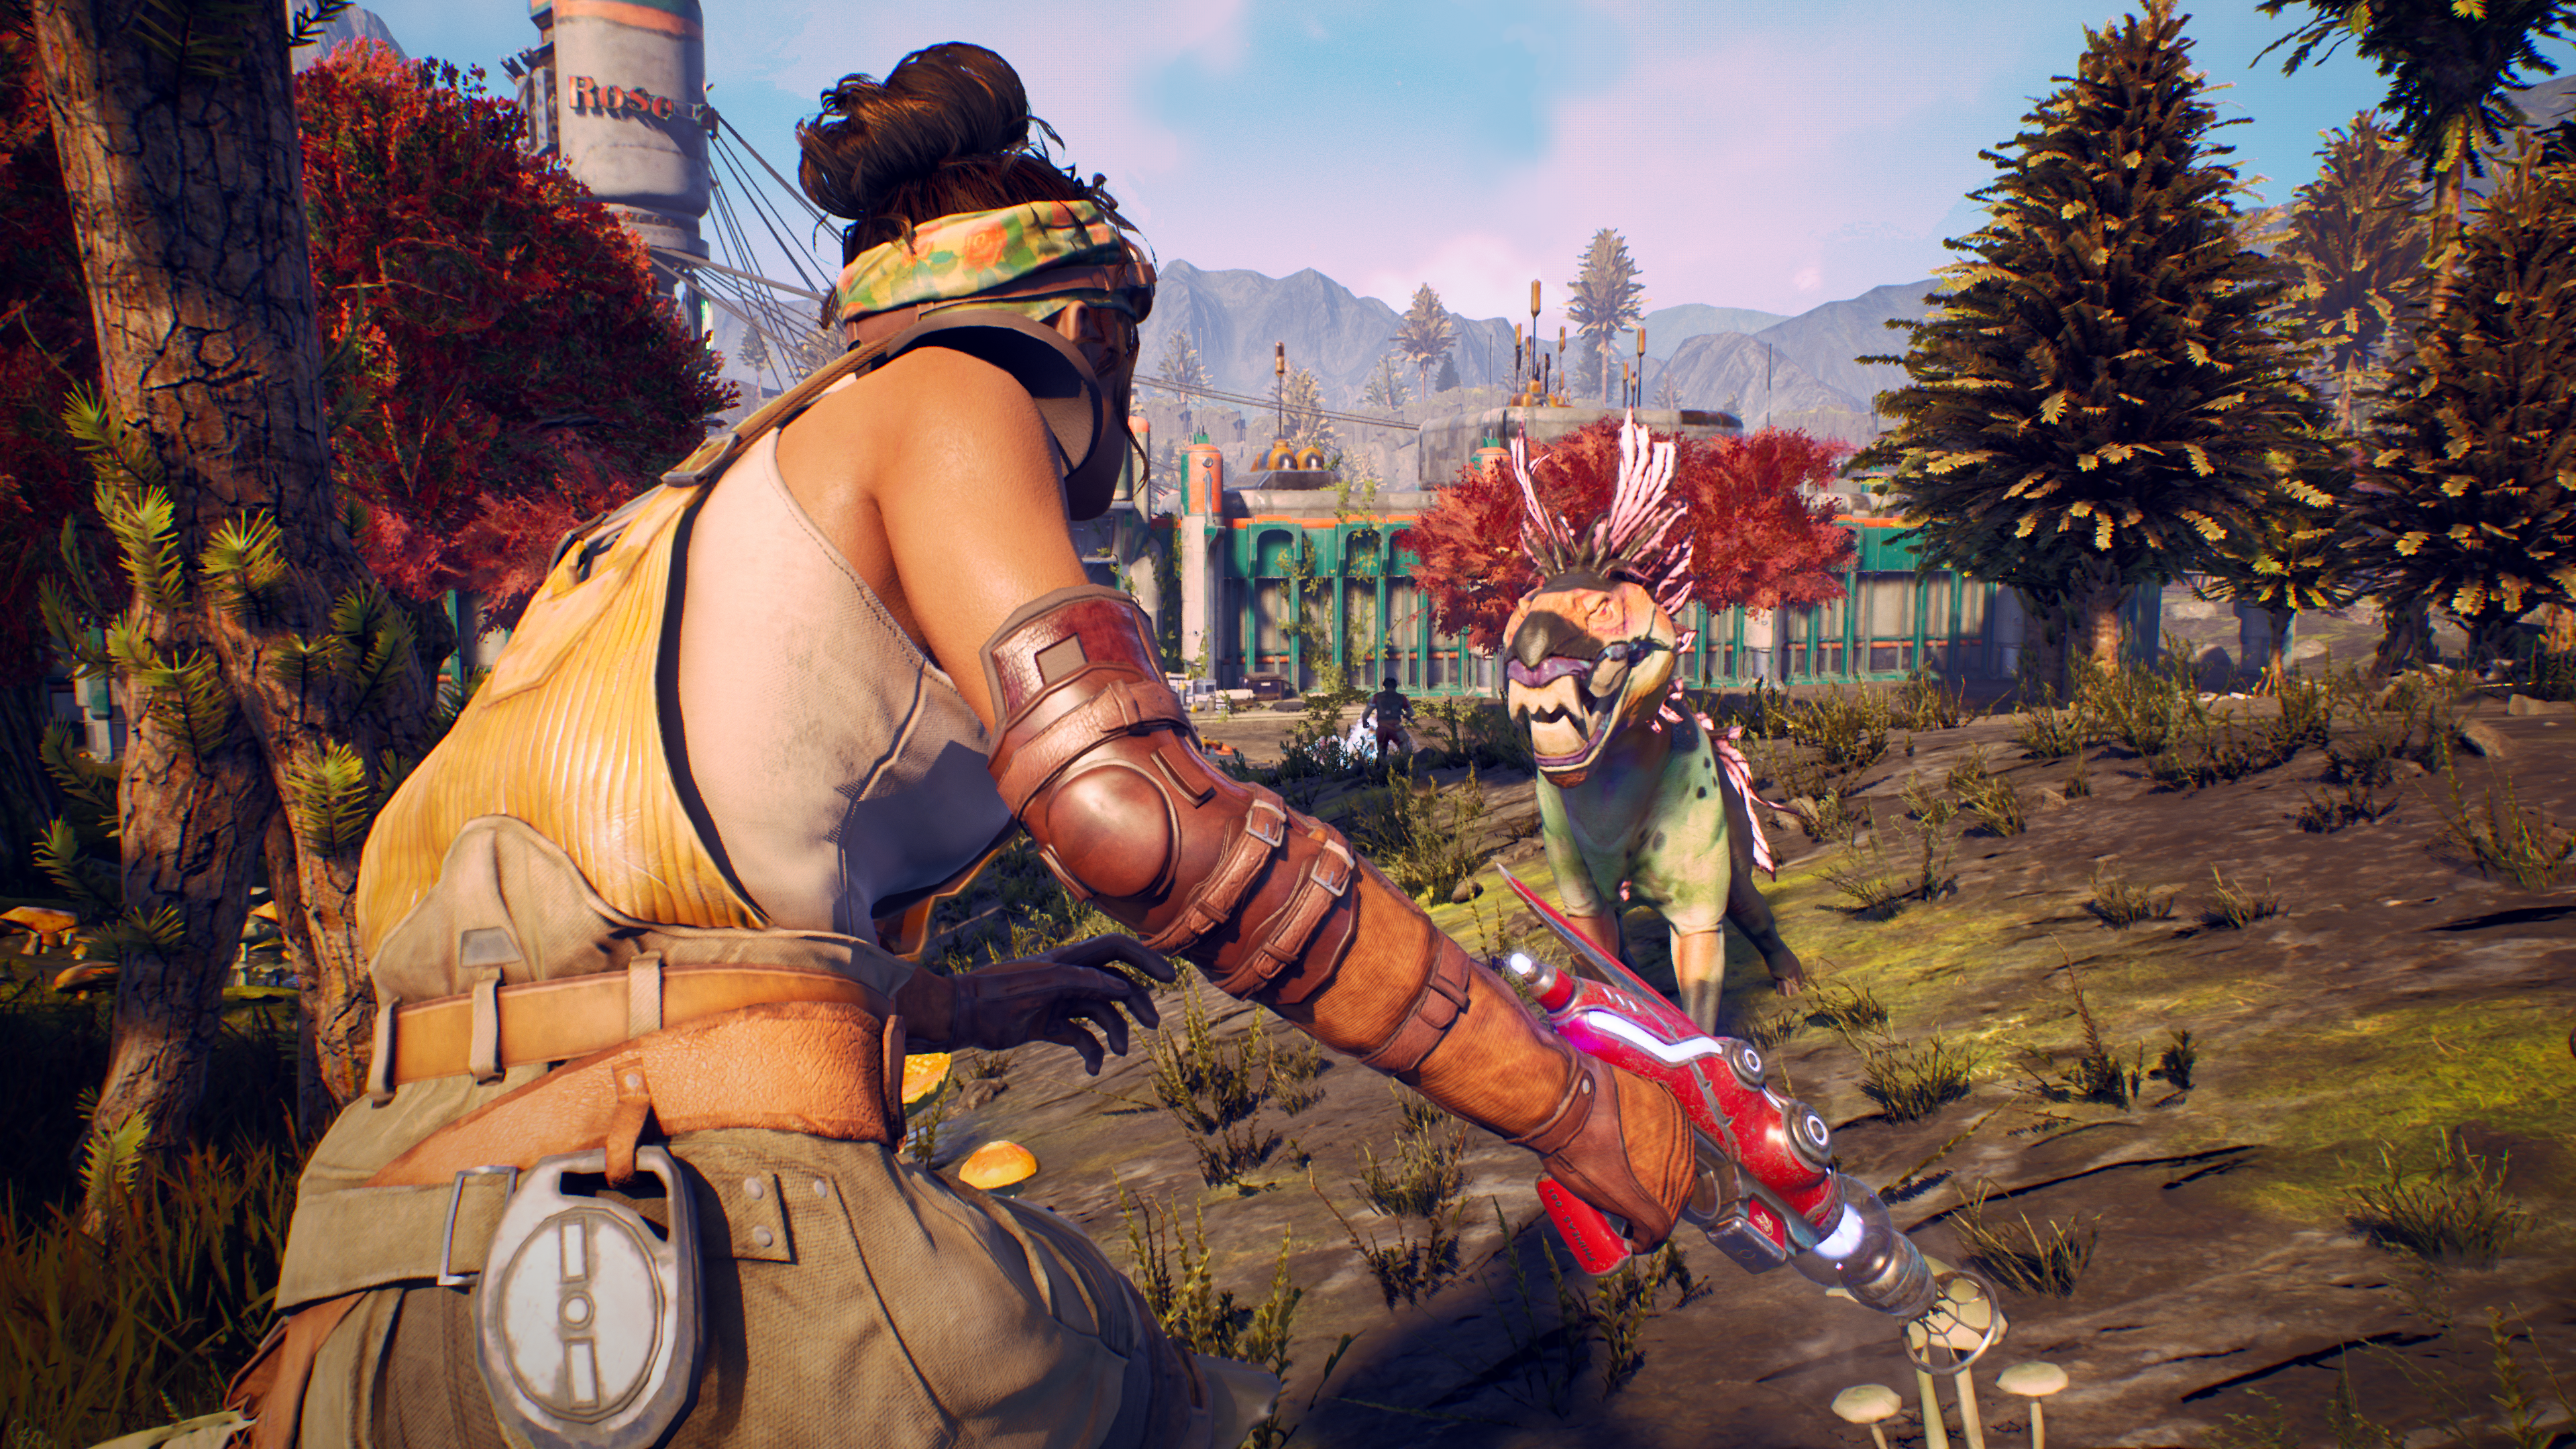 Image for The Outer Worlds has shipped over 2 million units,?significantly exceeding company expectations